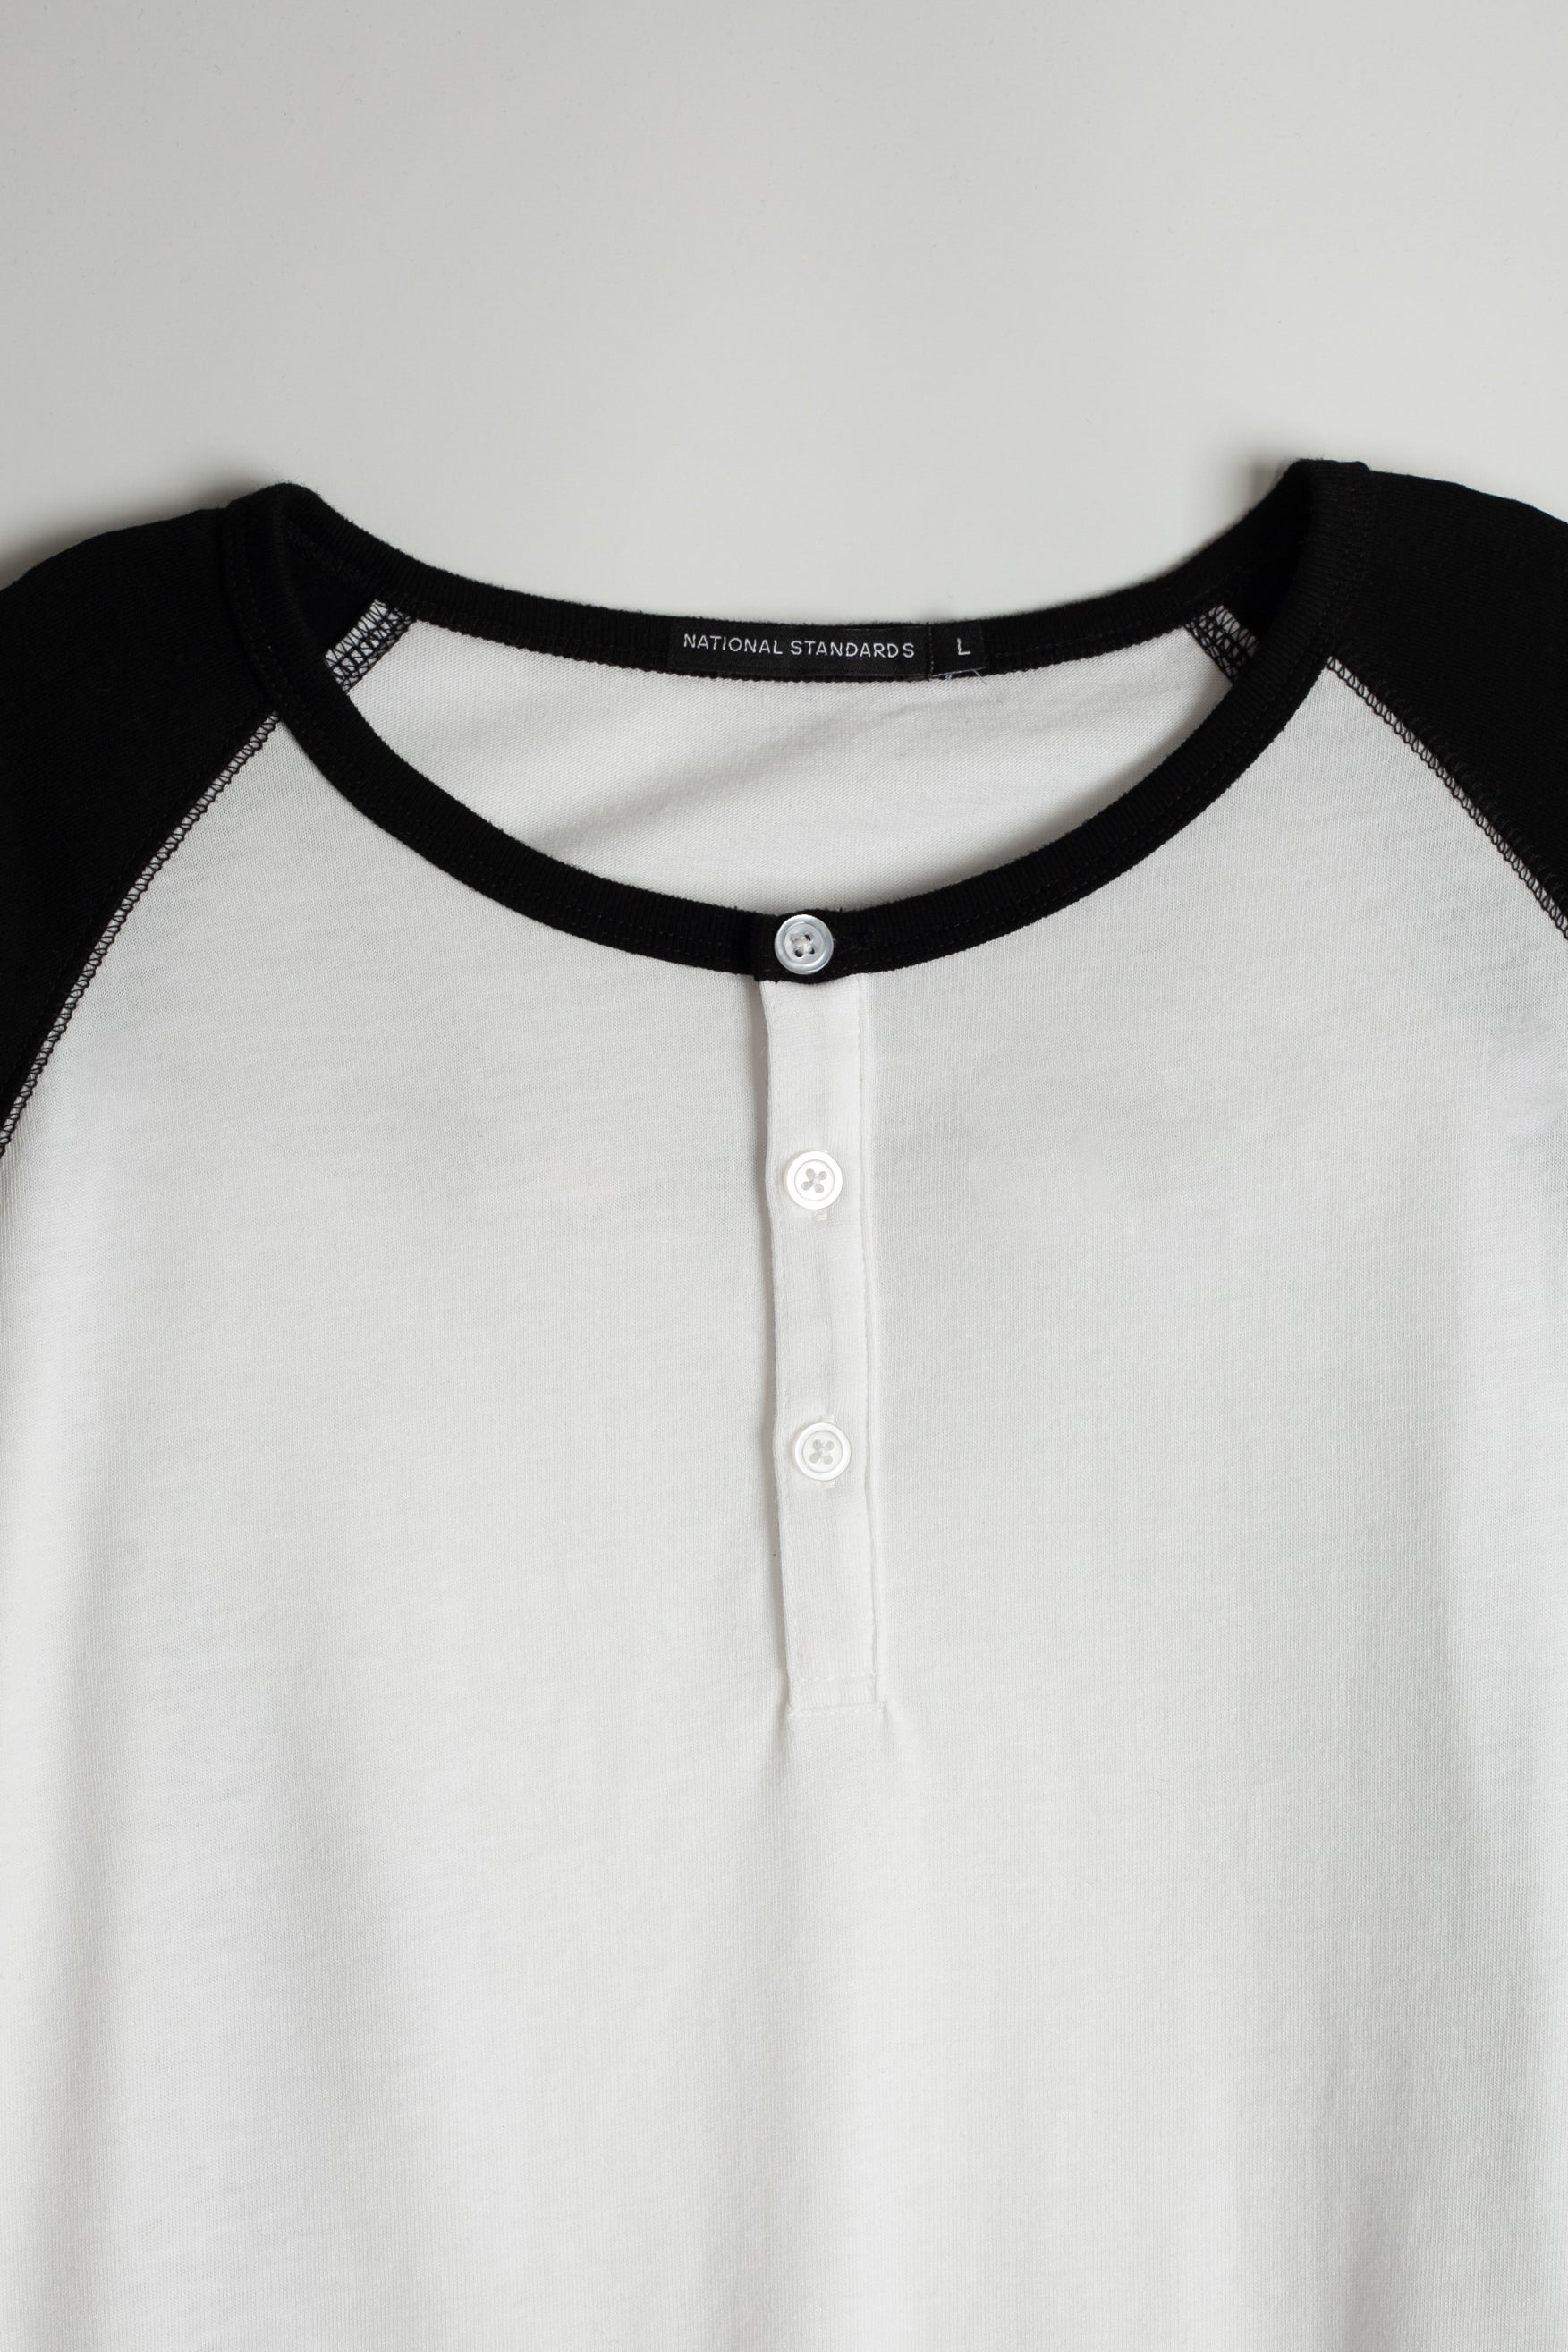 Tri-blend 3/4 henley in White and Black 06